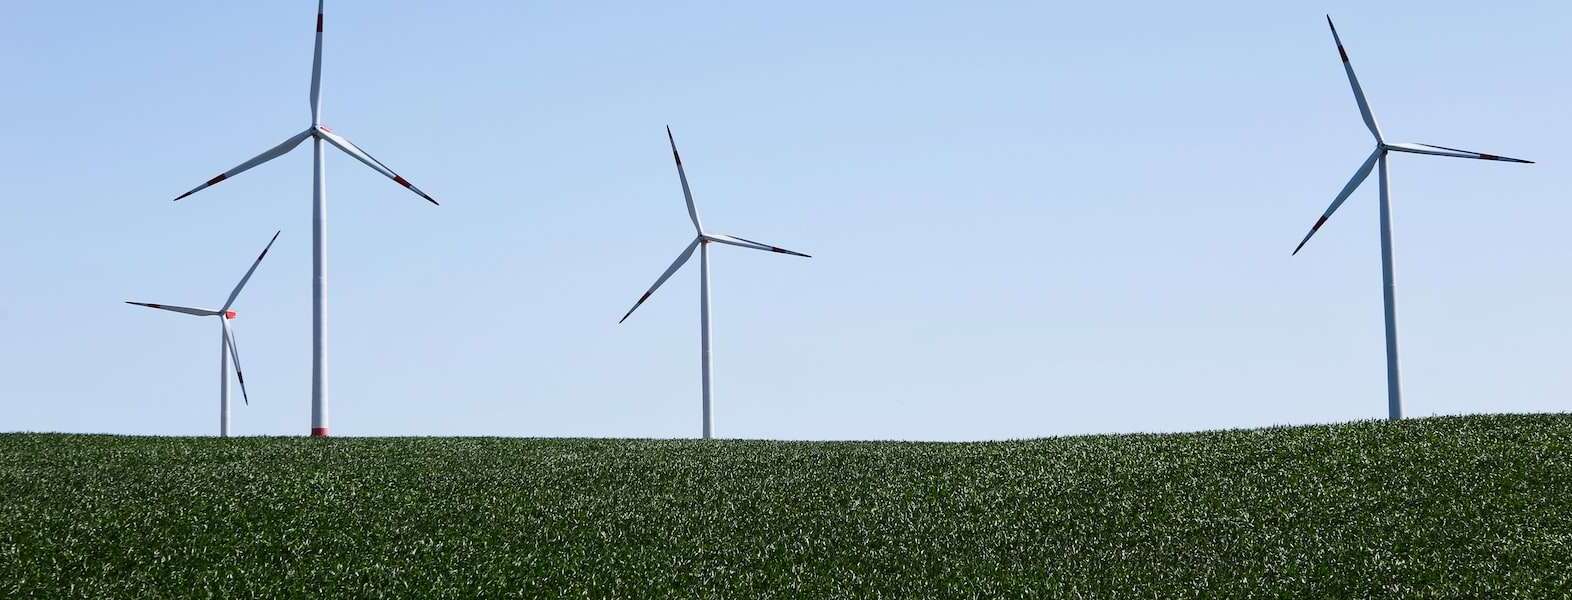 Four wind turbines in a green field against a blue sky.